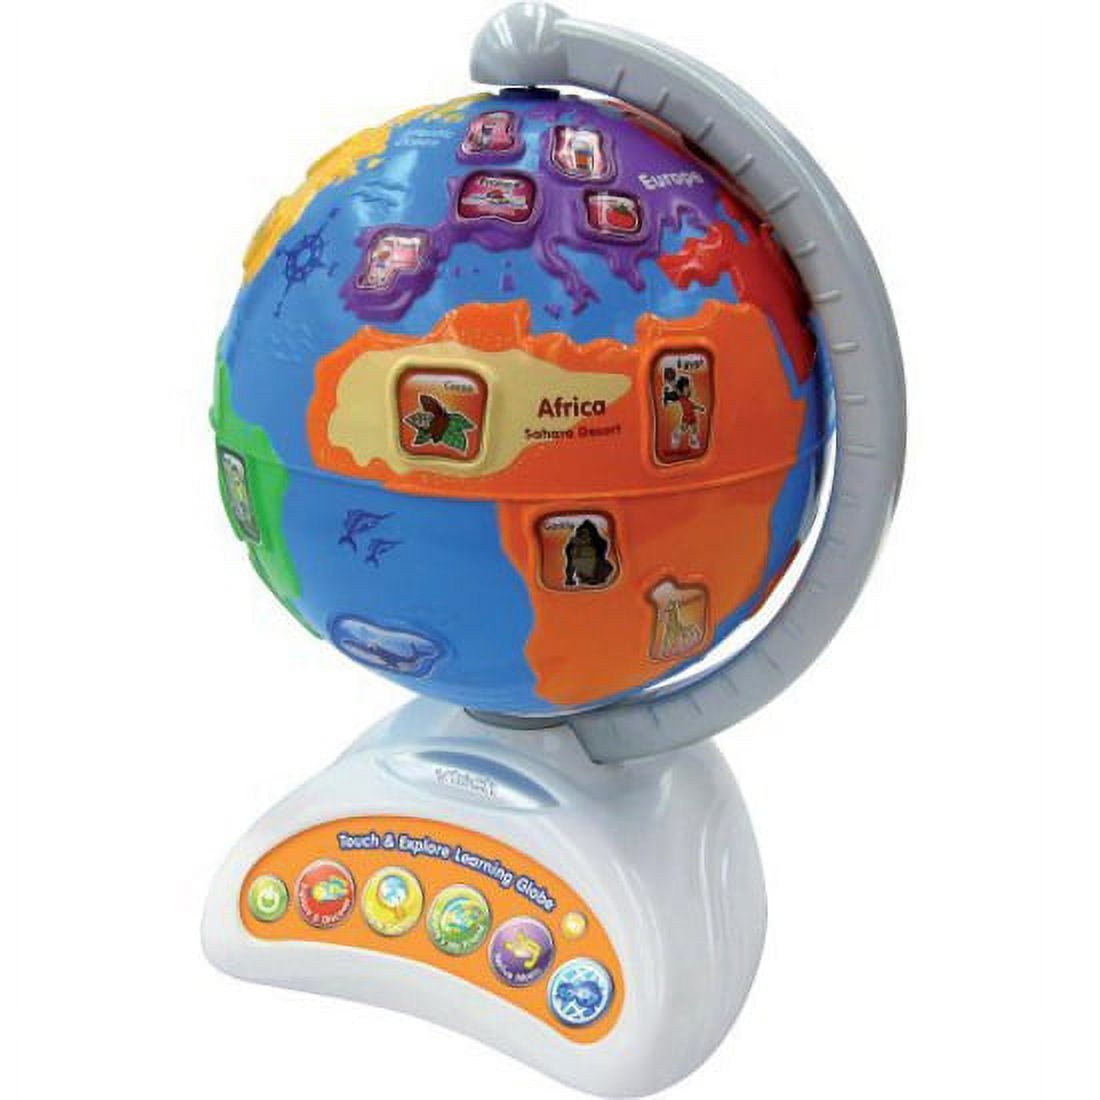 V Tech VTech Spin & Learn Adventure Globe World adventure with